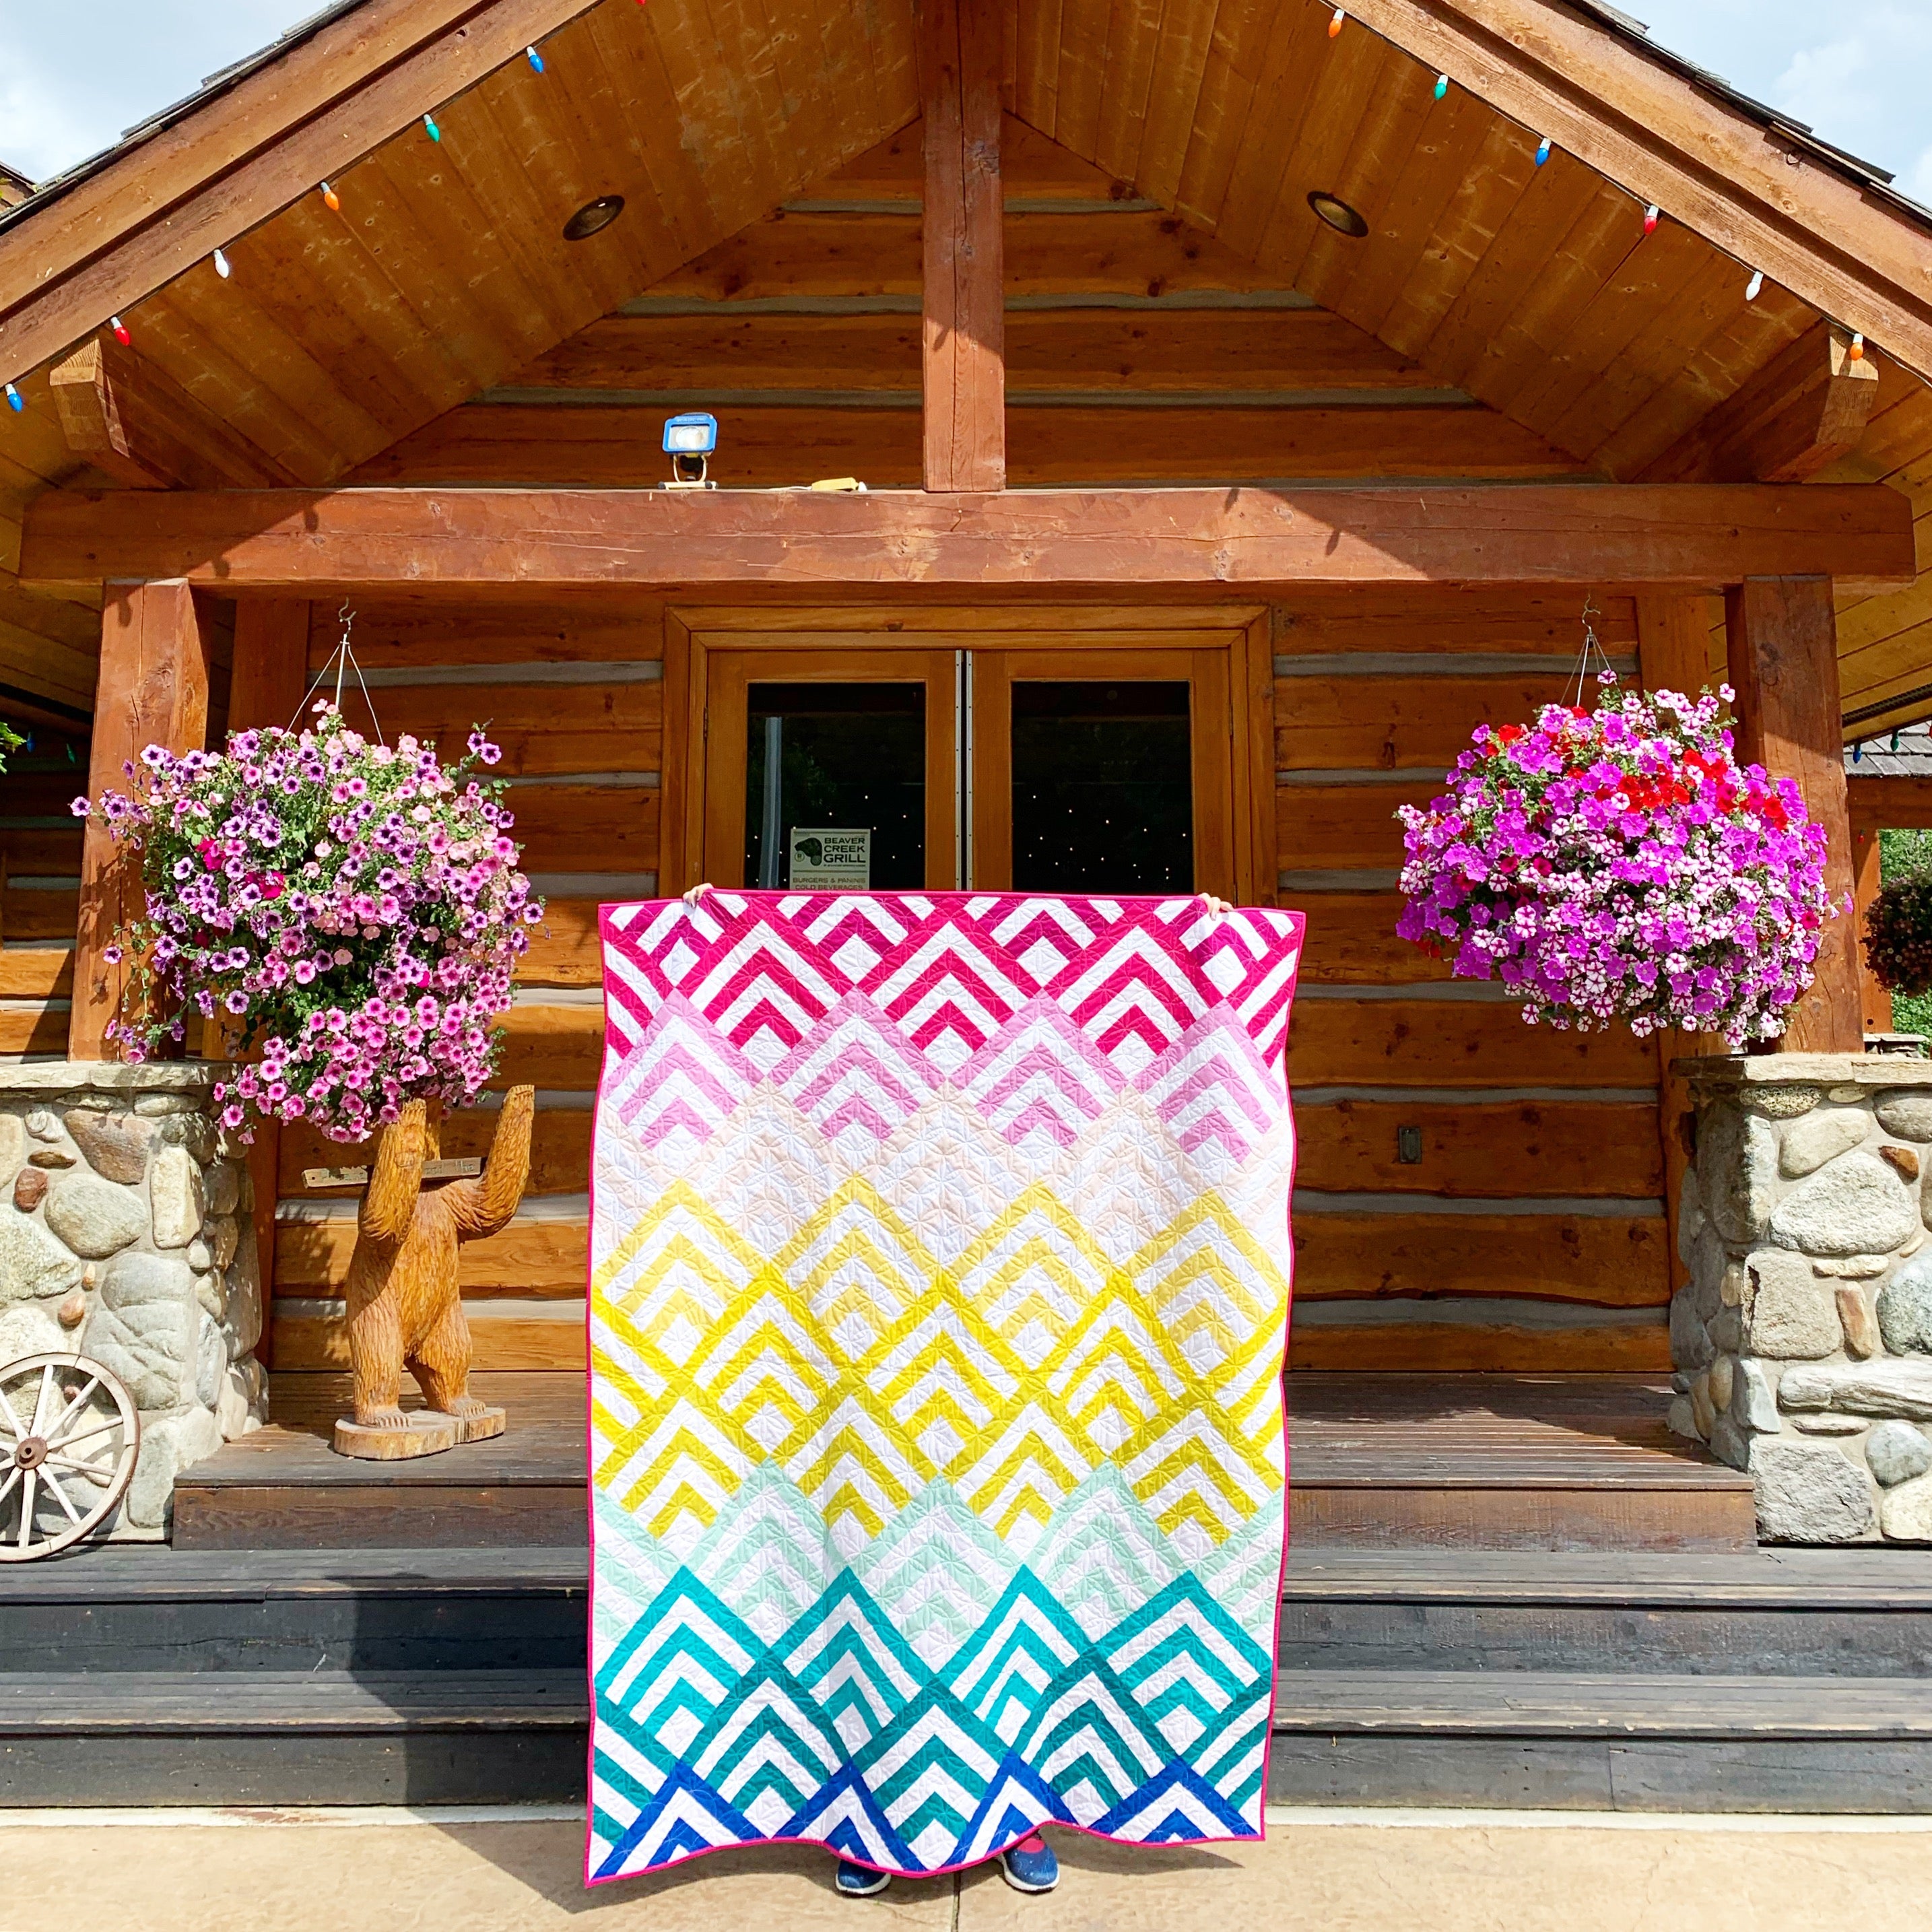 Cabin Peaks quilt patten - a modern quilt pattern that takes on the classic log cabin quilt block.